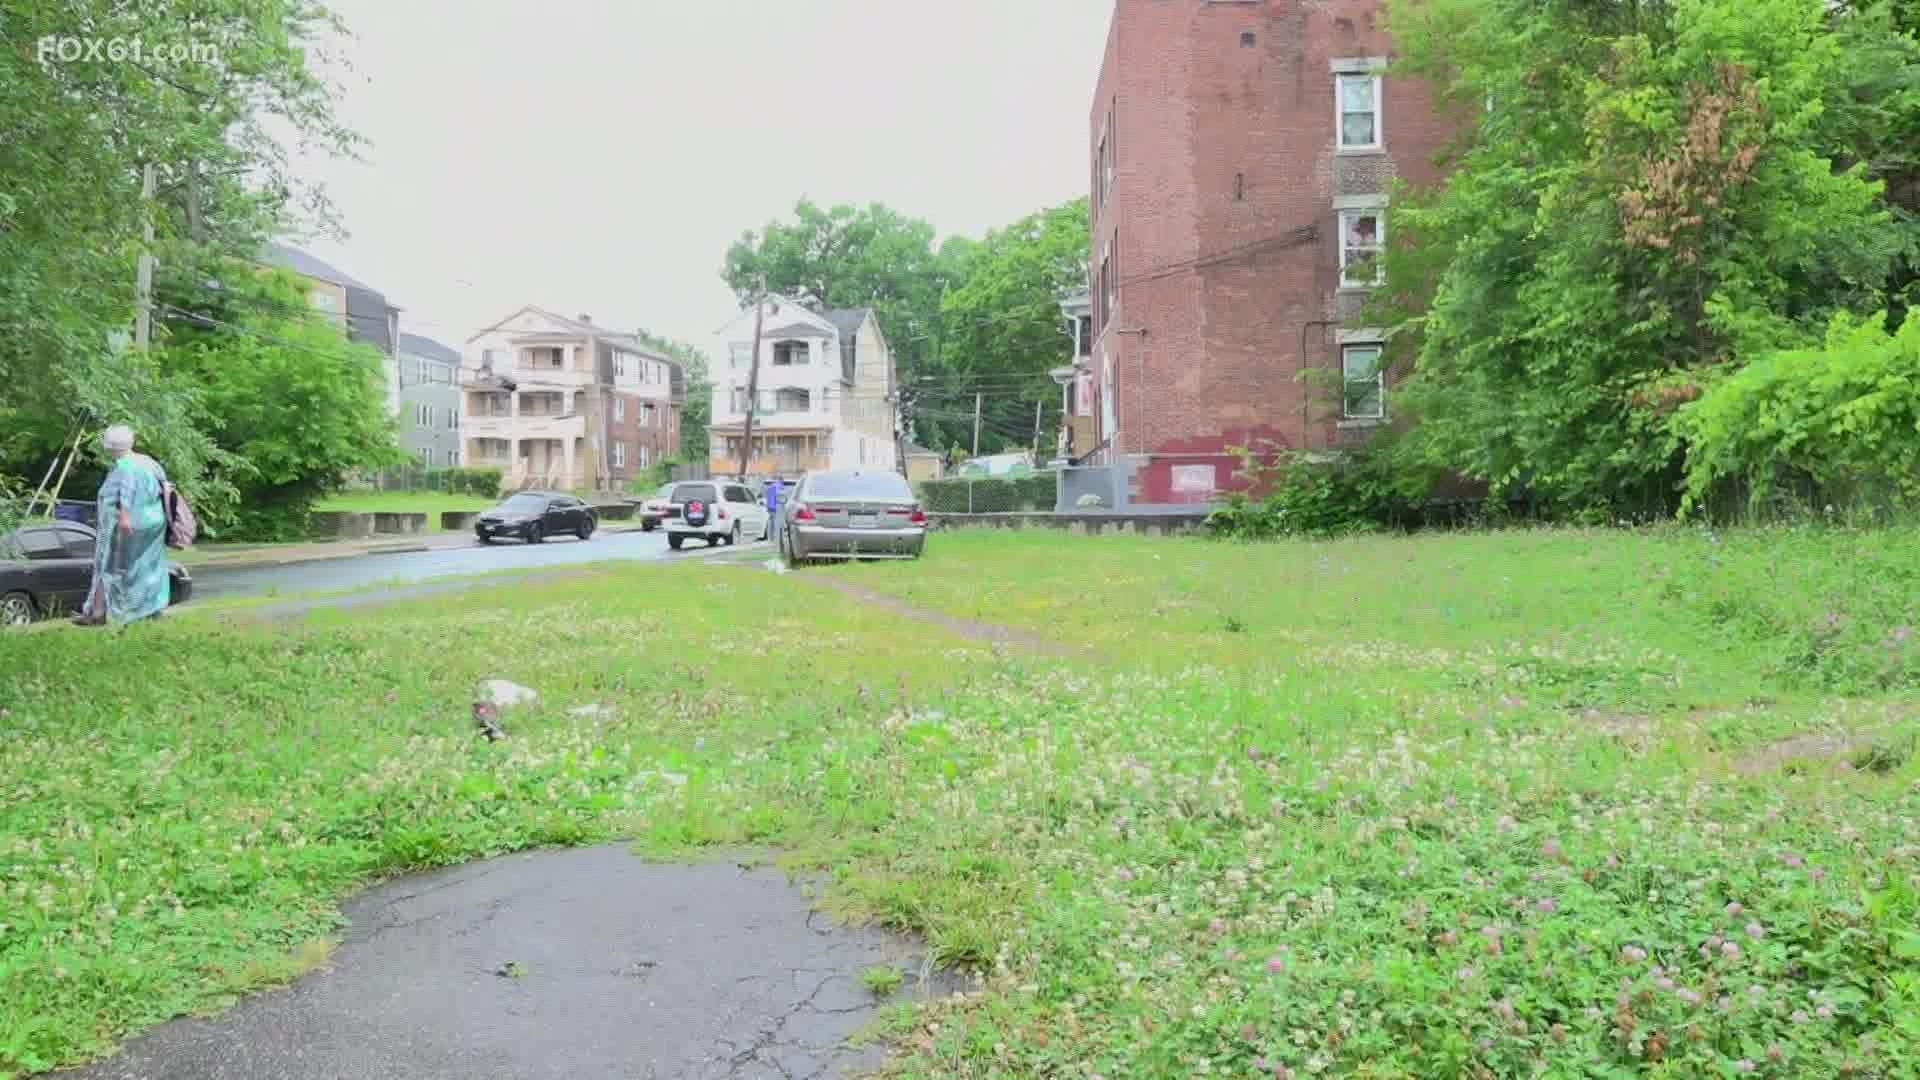 The north end of Hartford is considered a food desert. Community members are looking to create a community garden to help address food insecurity in the area.